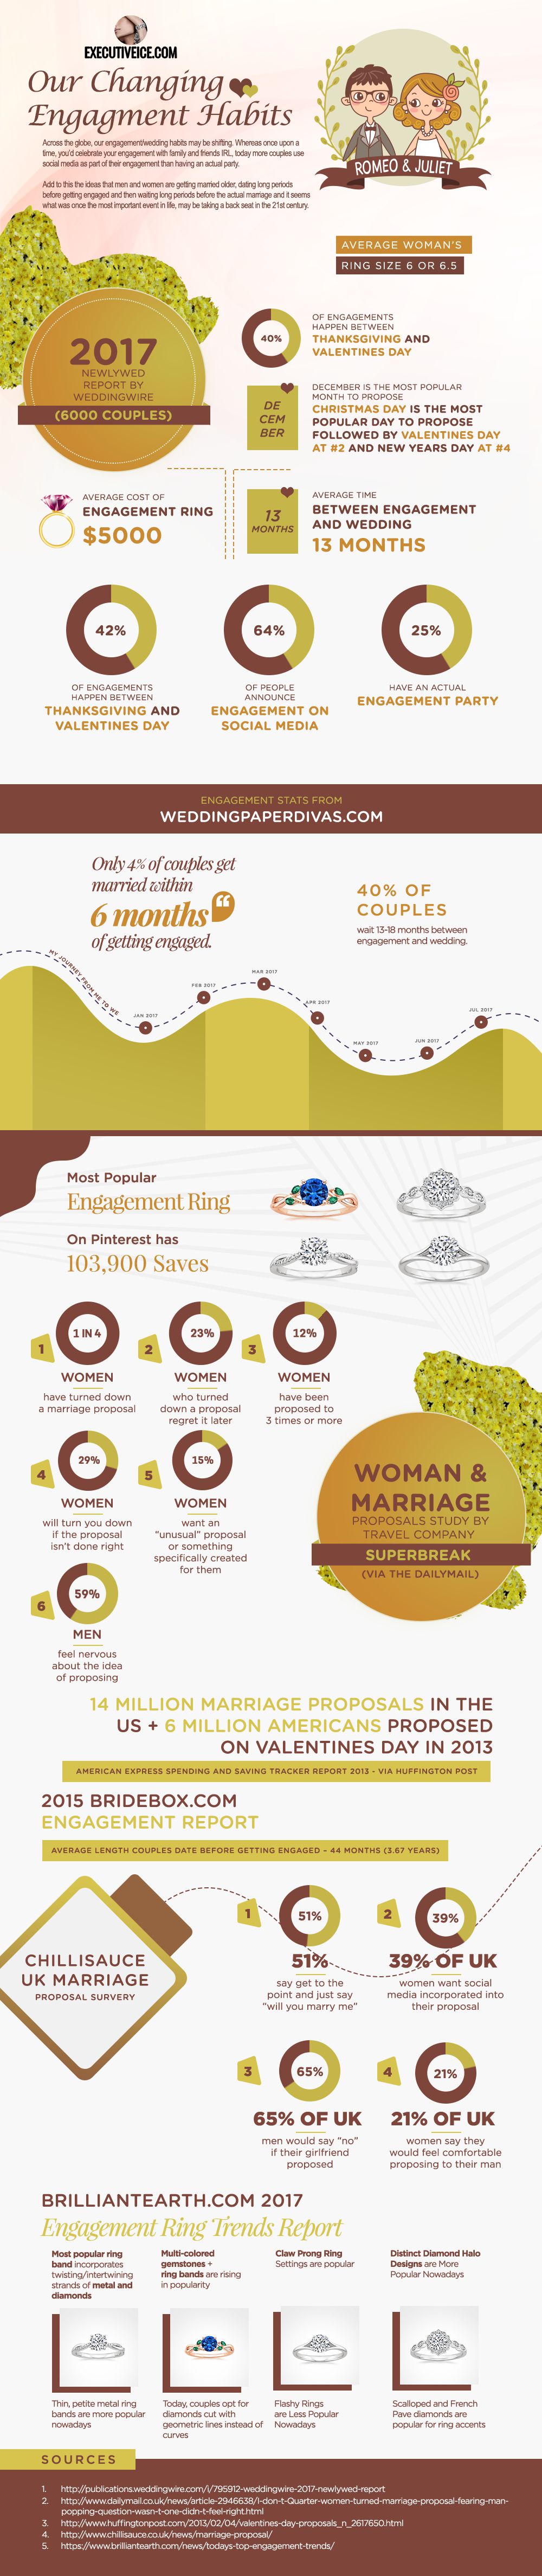 Our Changing Engagement/Marriage Habits in 2017